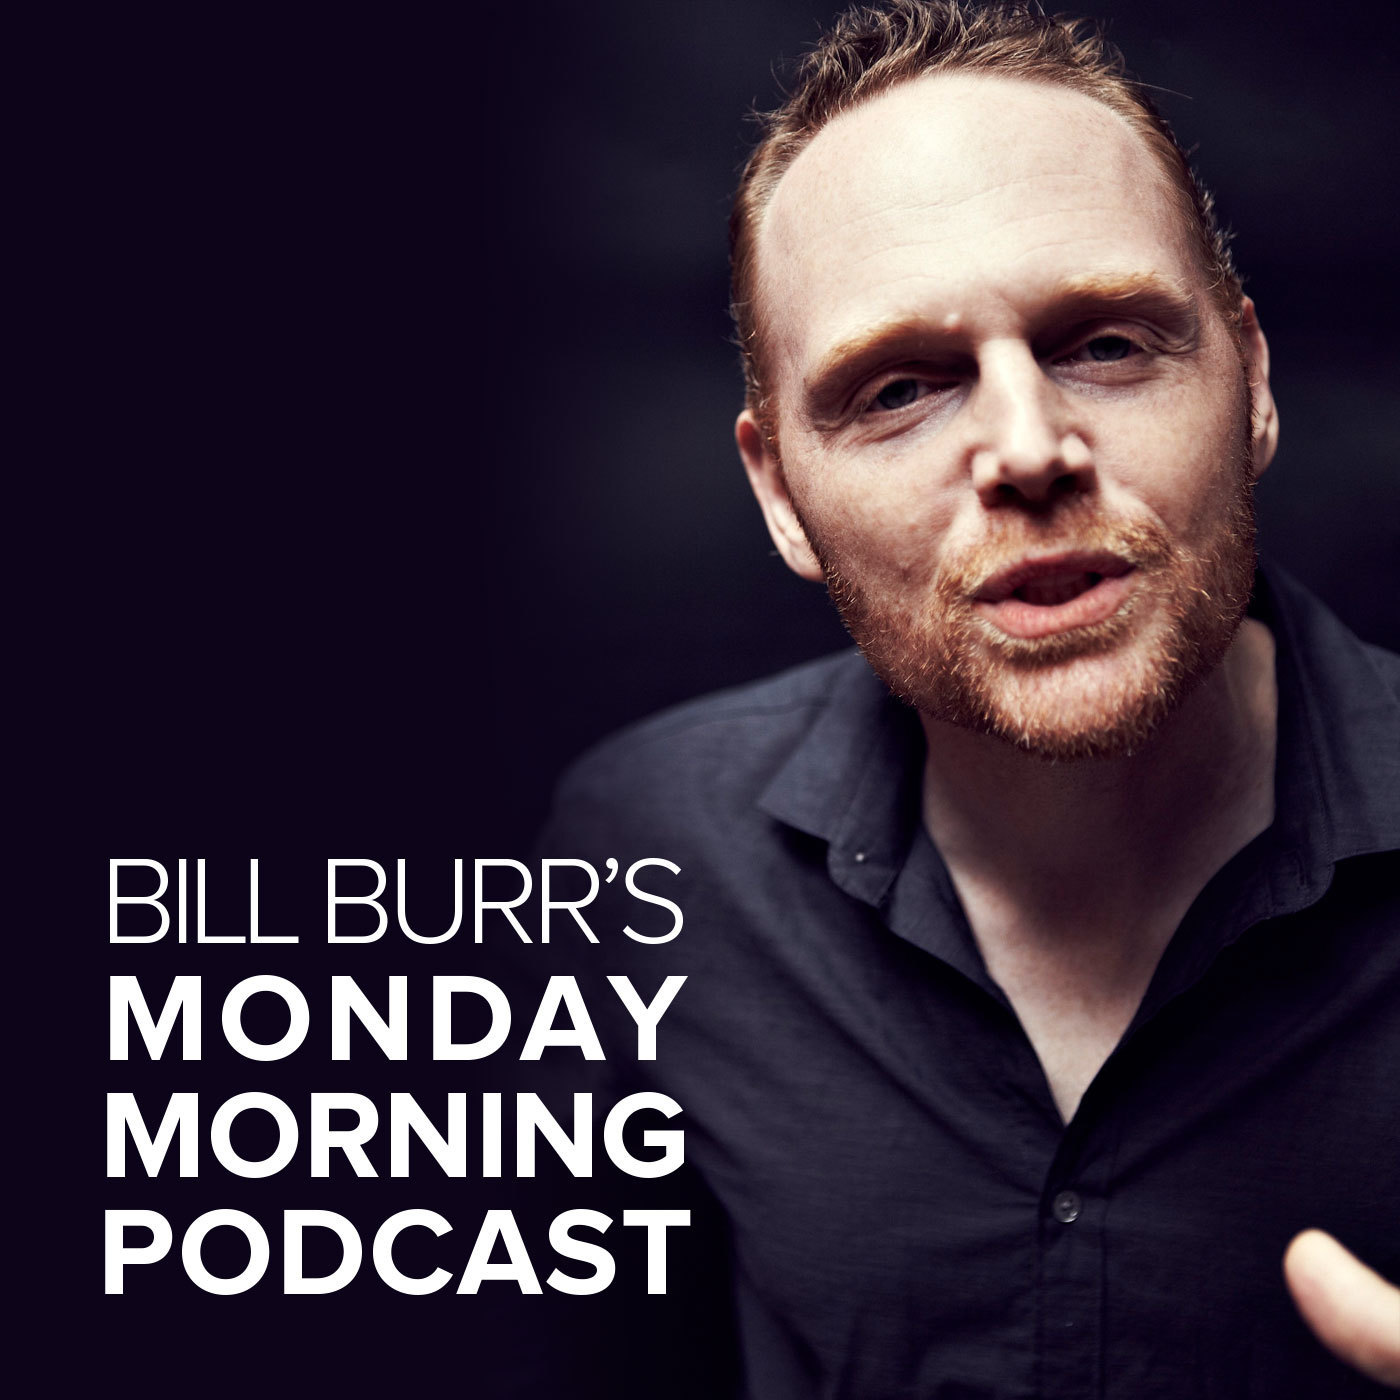 Thursday Afternoon Monday Morning Podcast 11-12-15